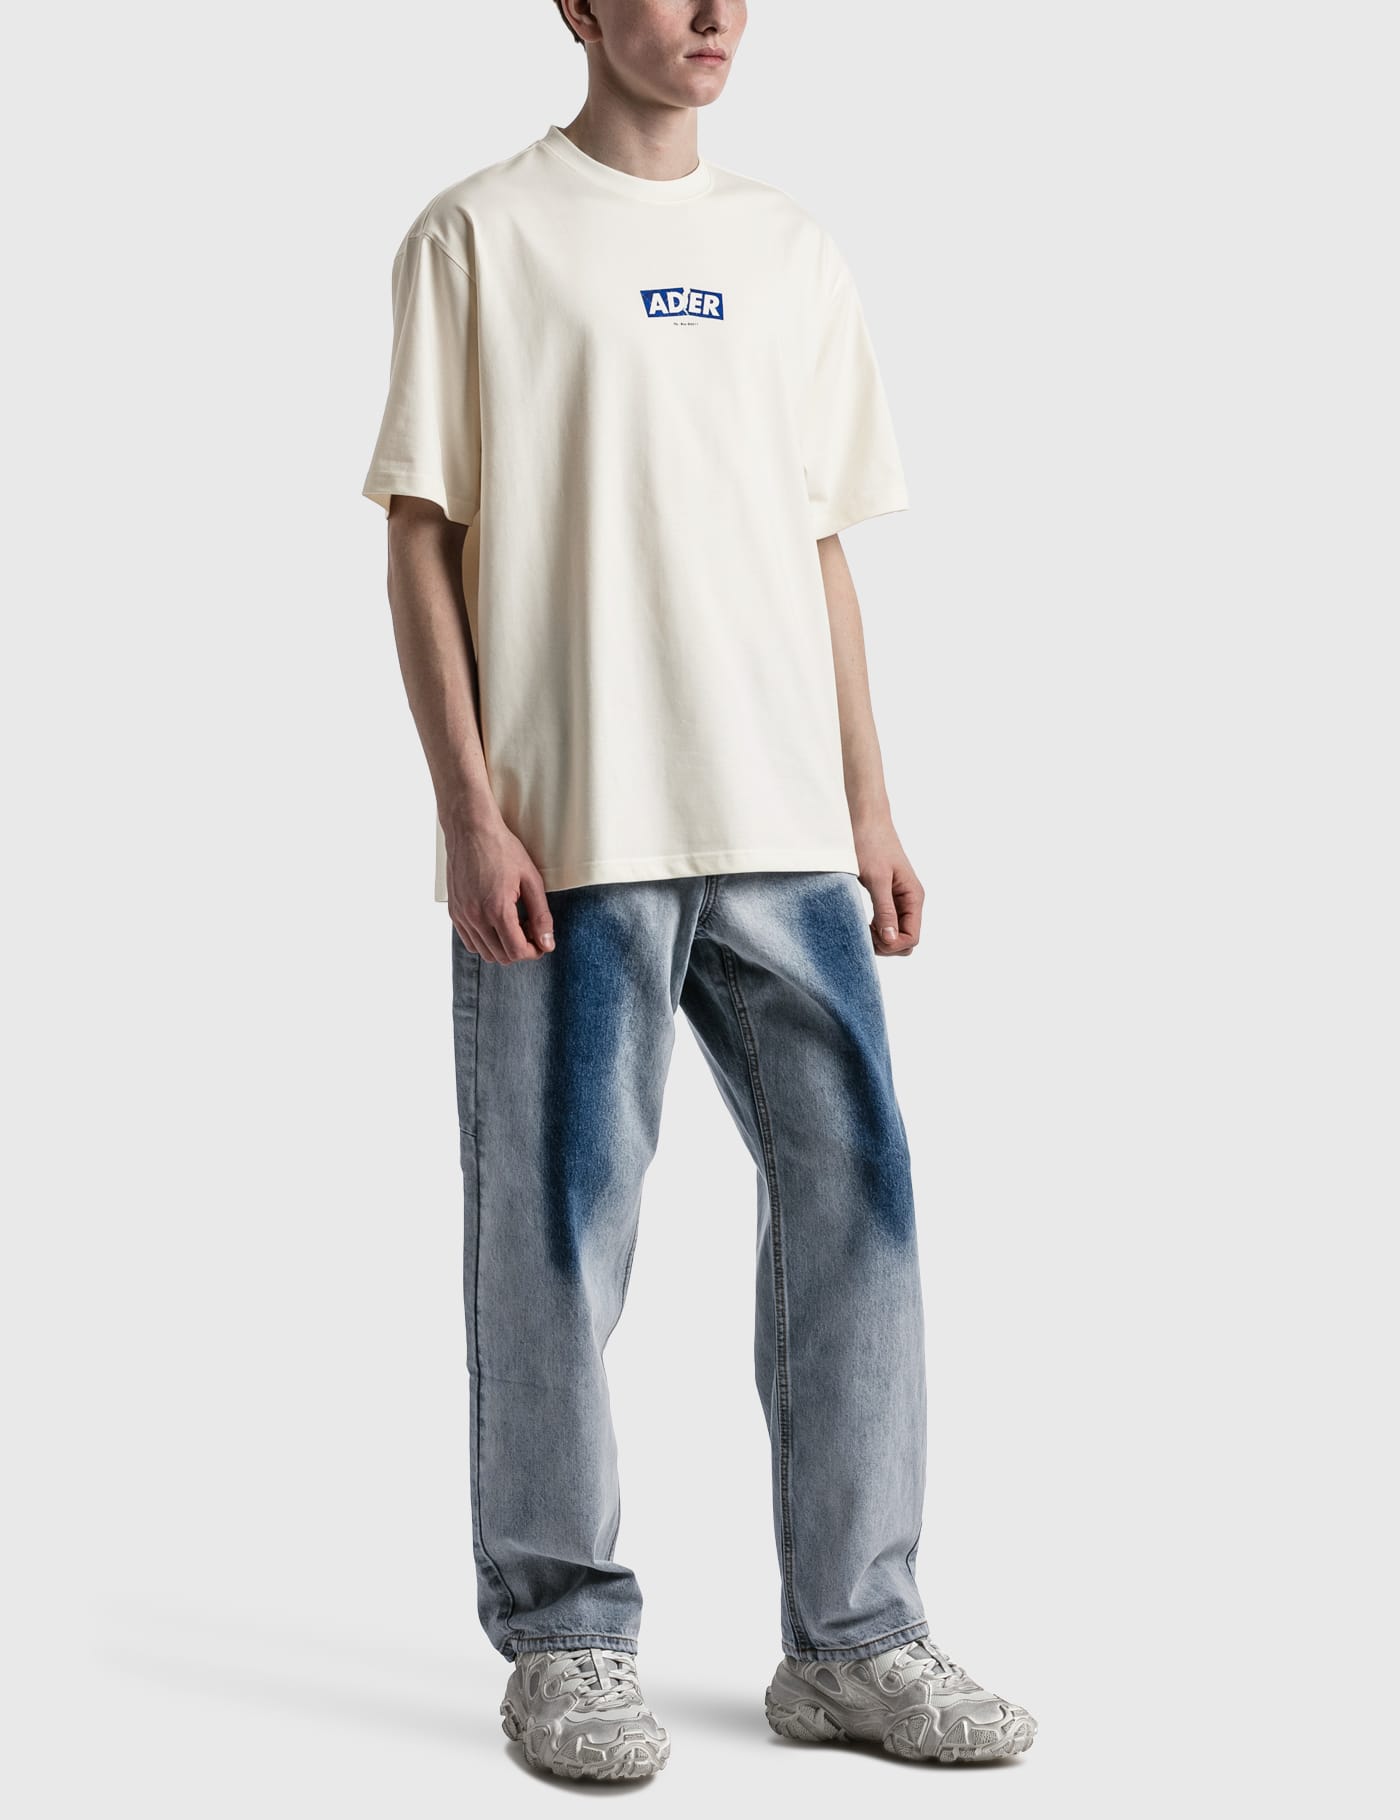 Ader Error - OG Box Logo T-shirt | HBX - Globally Curated Fashion and  Lifestyle by Hypebeast